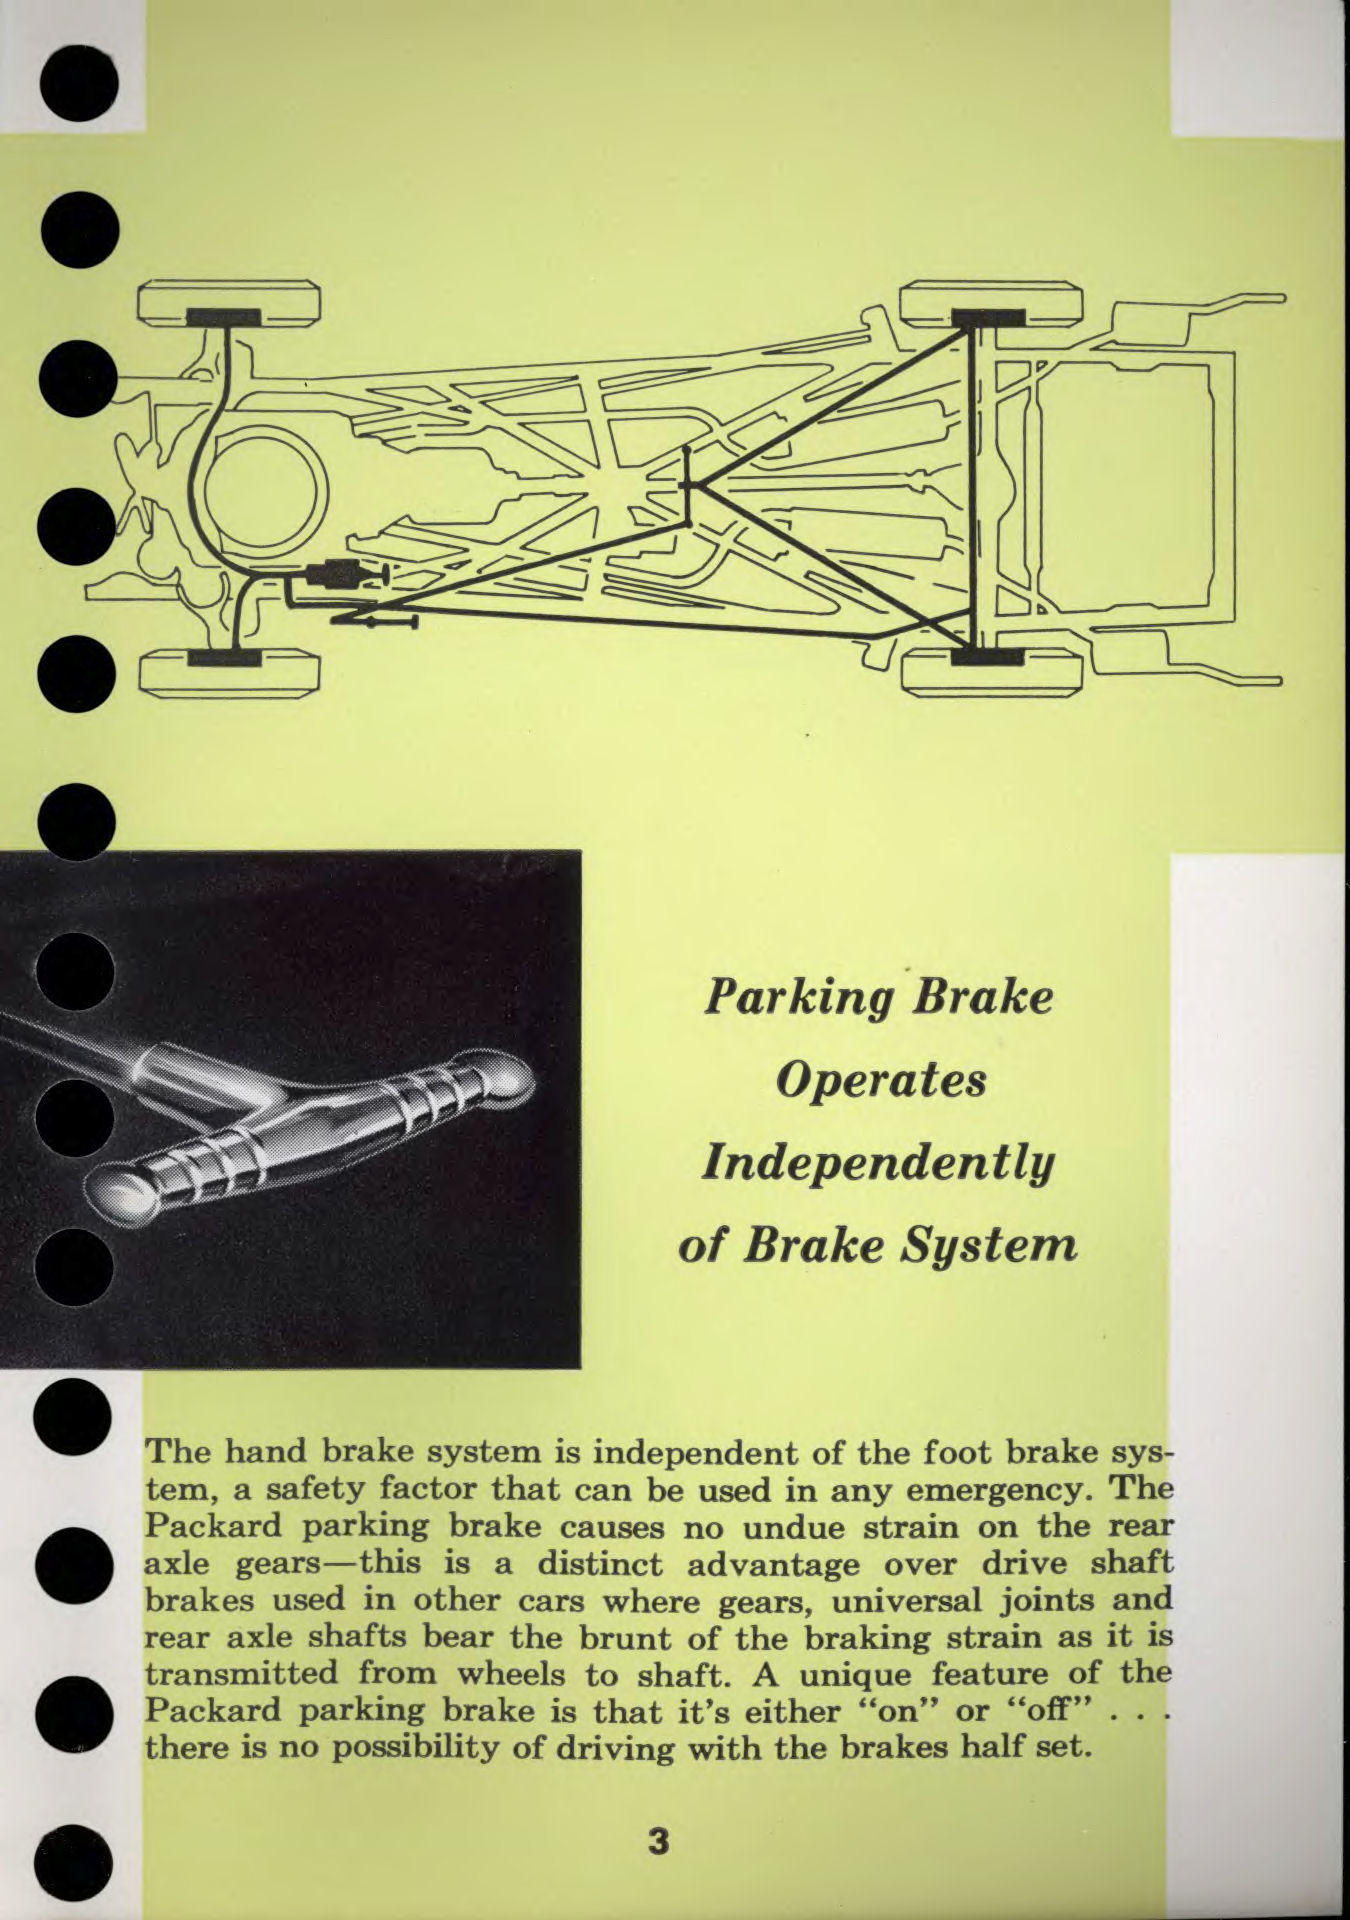 1956 Packard Data Book Page 18